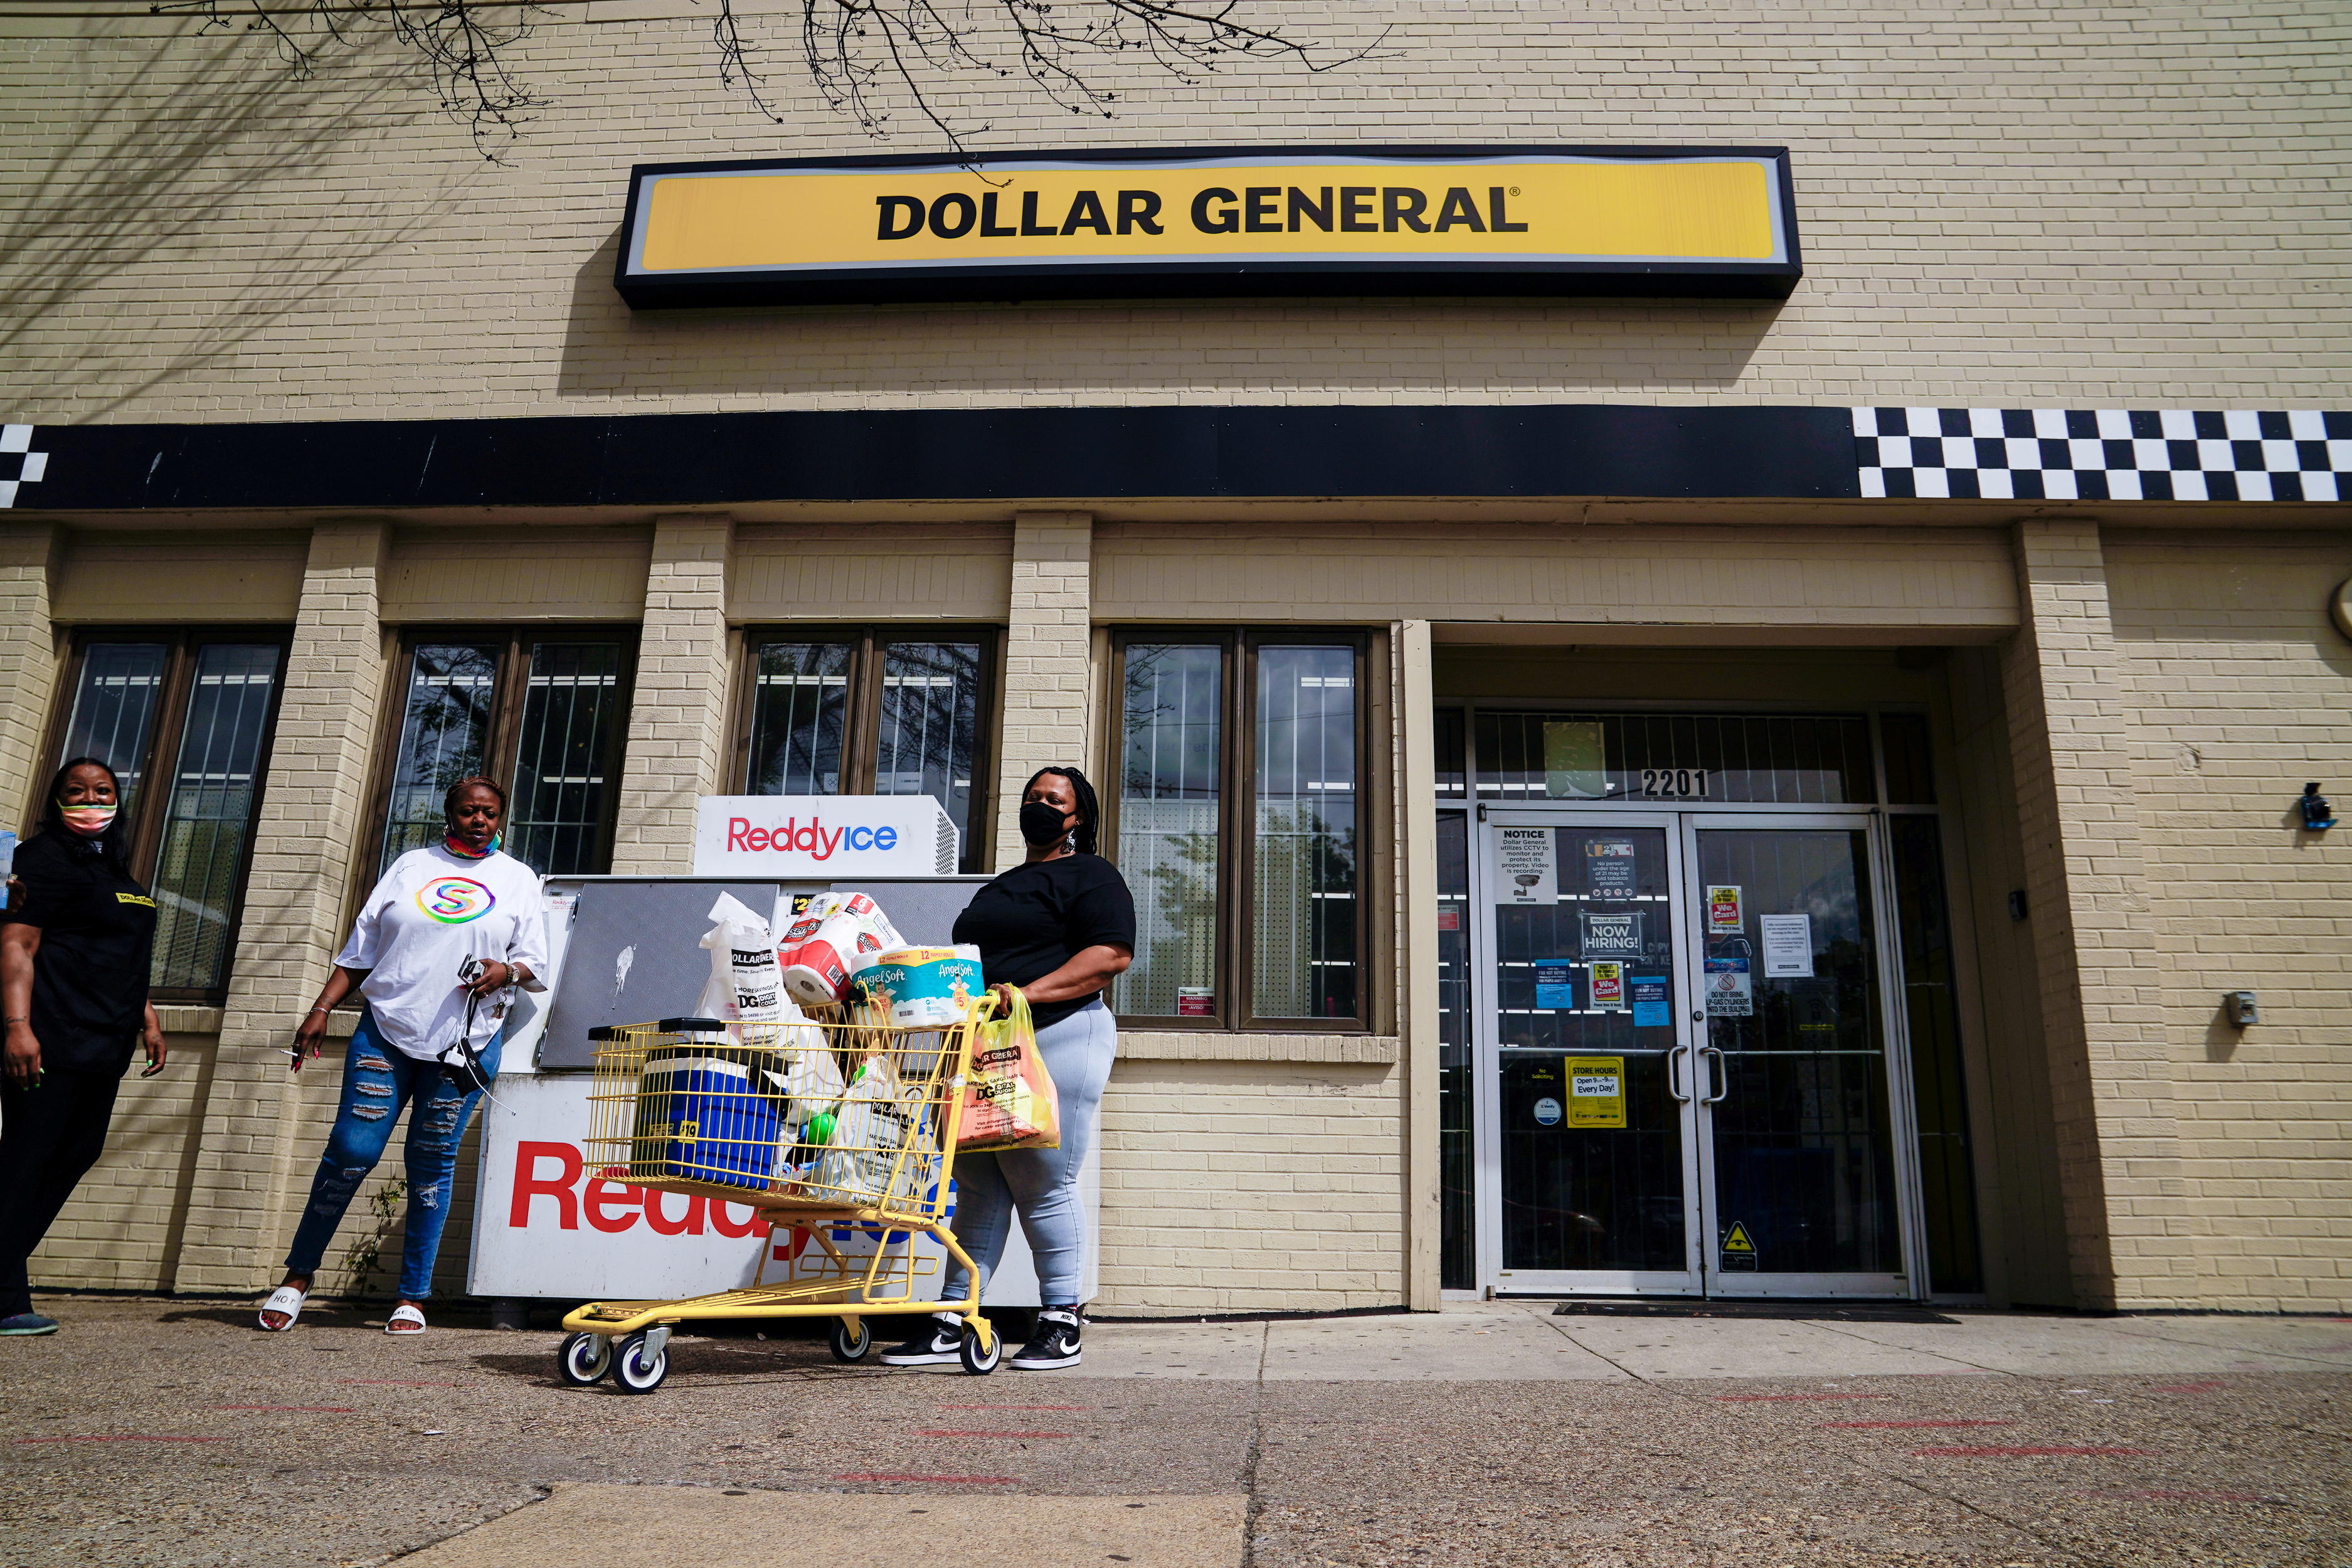 A person exits a Dollar General store in Mount Rainier, Maryland, U.S., June 1, 2021. REUTERS/Erin Scott/File Photo